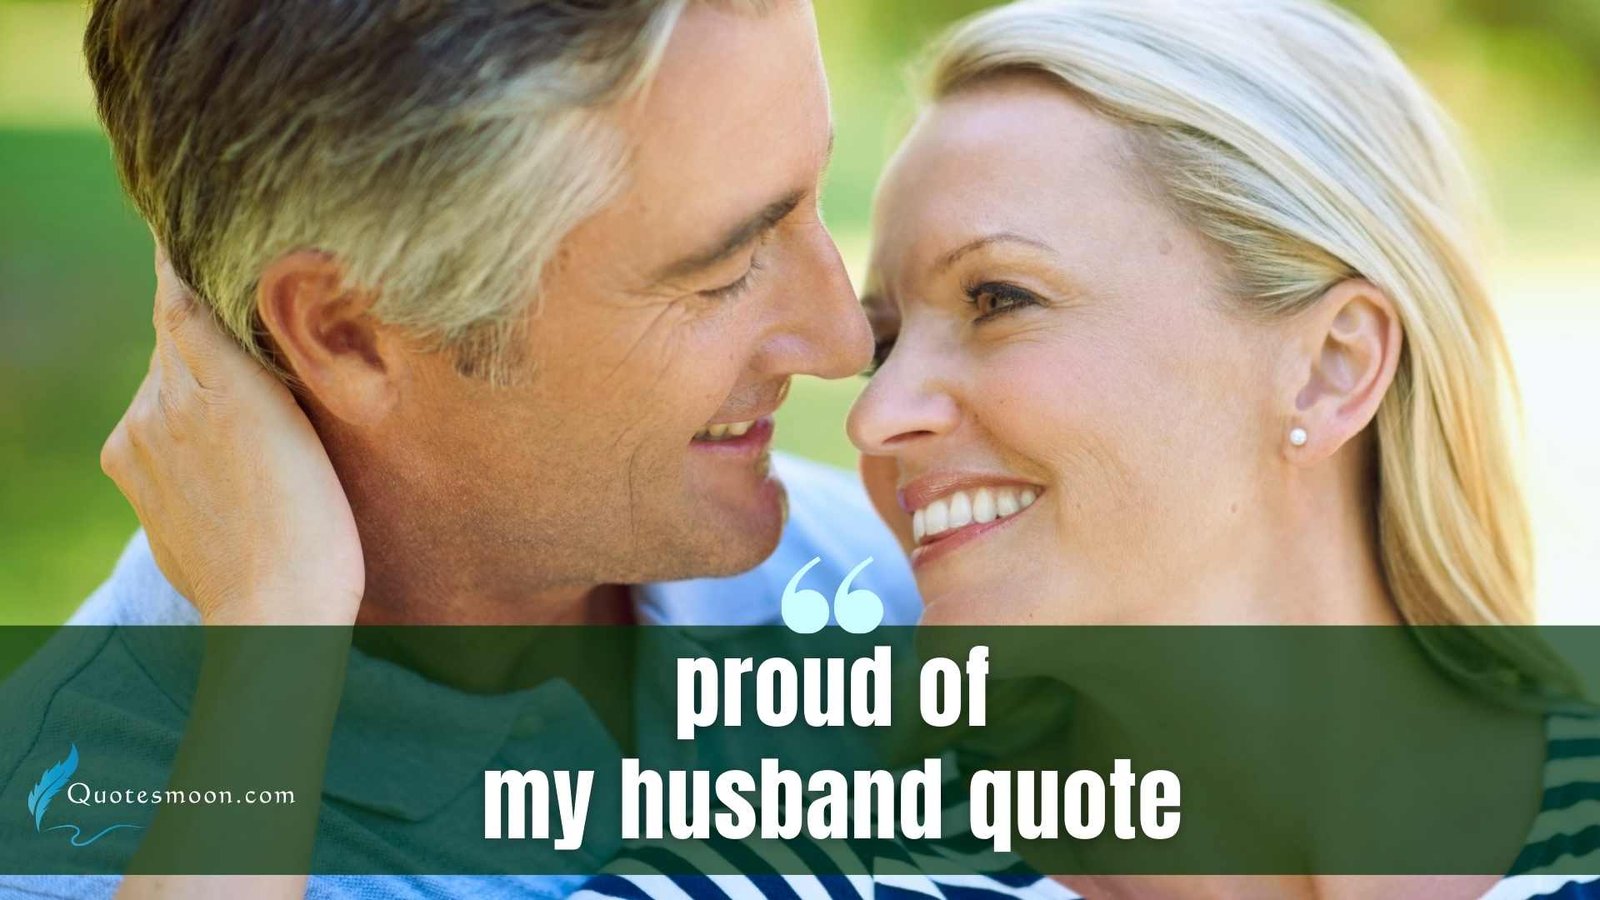 proud of my husband quote images